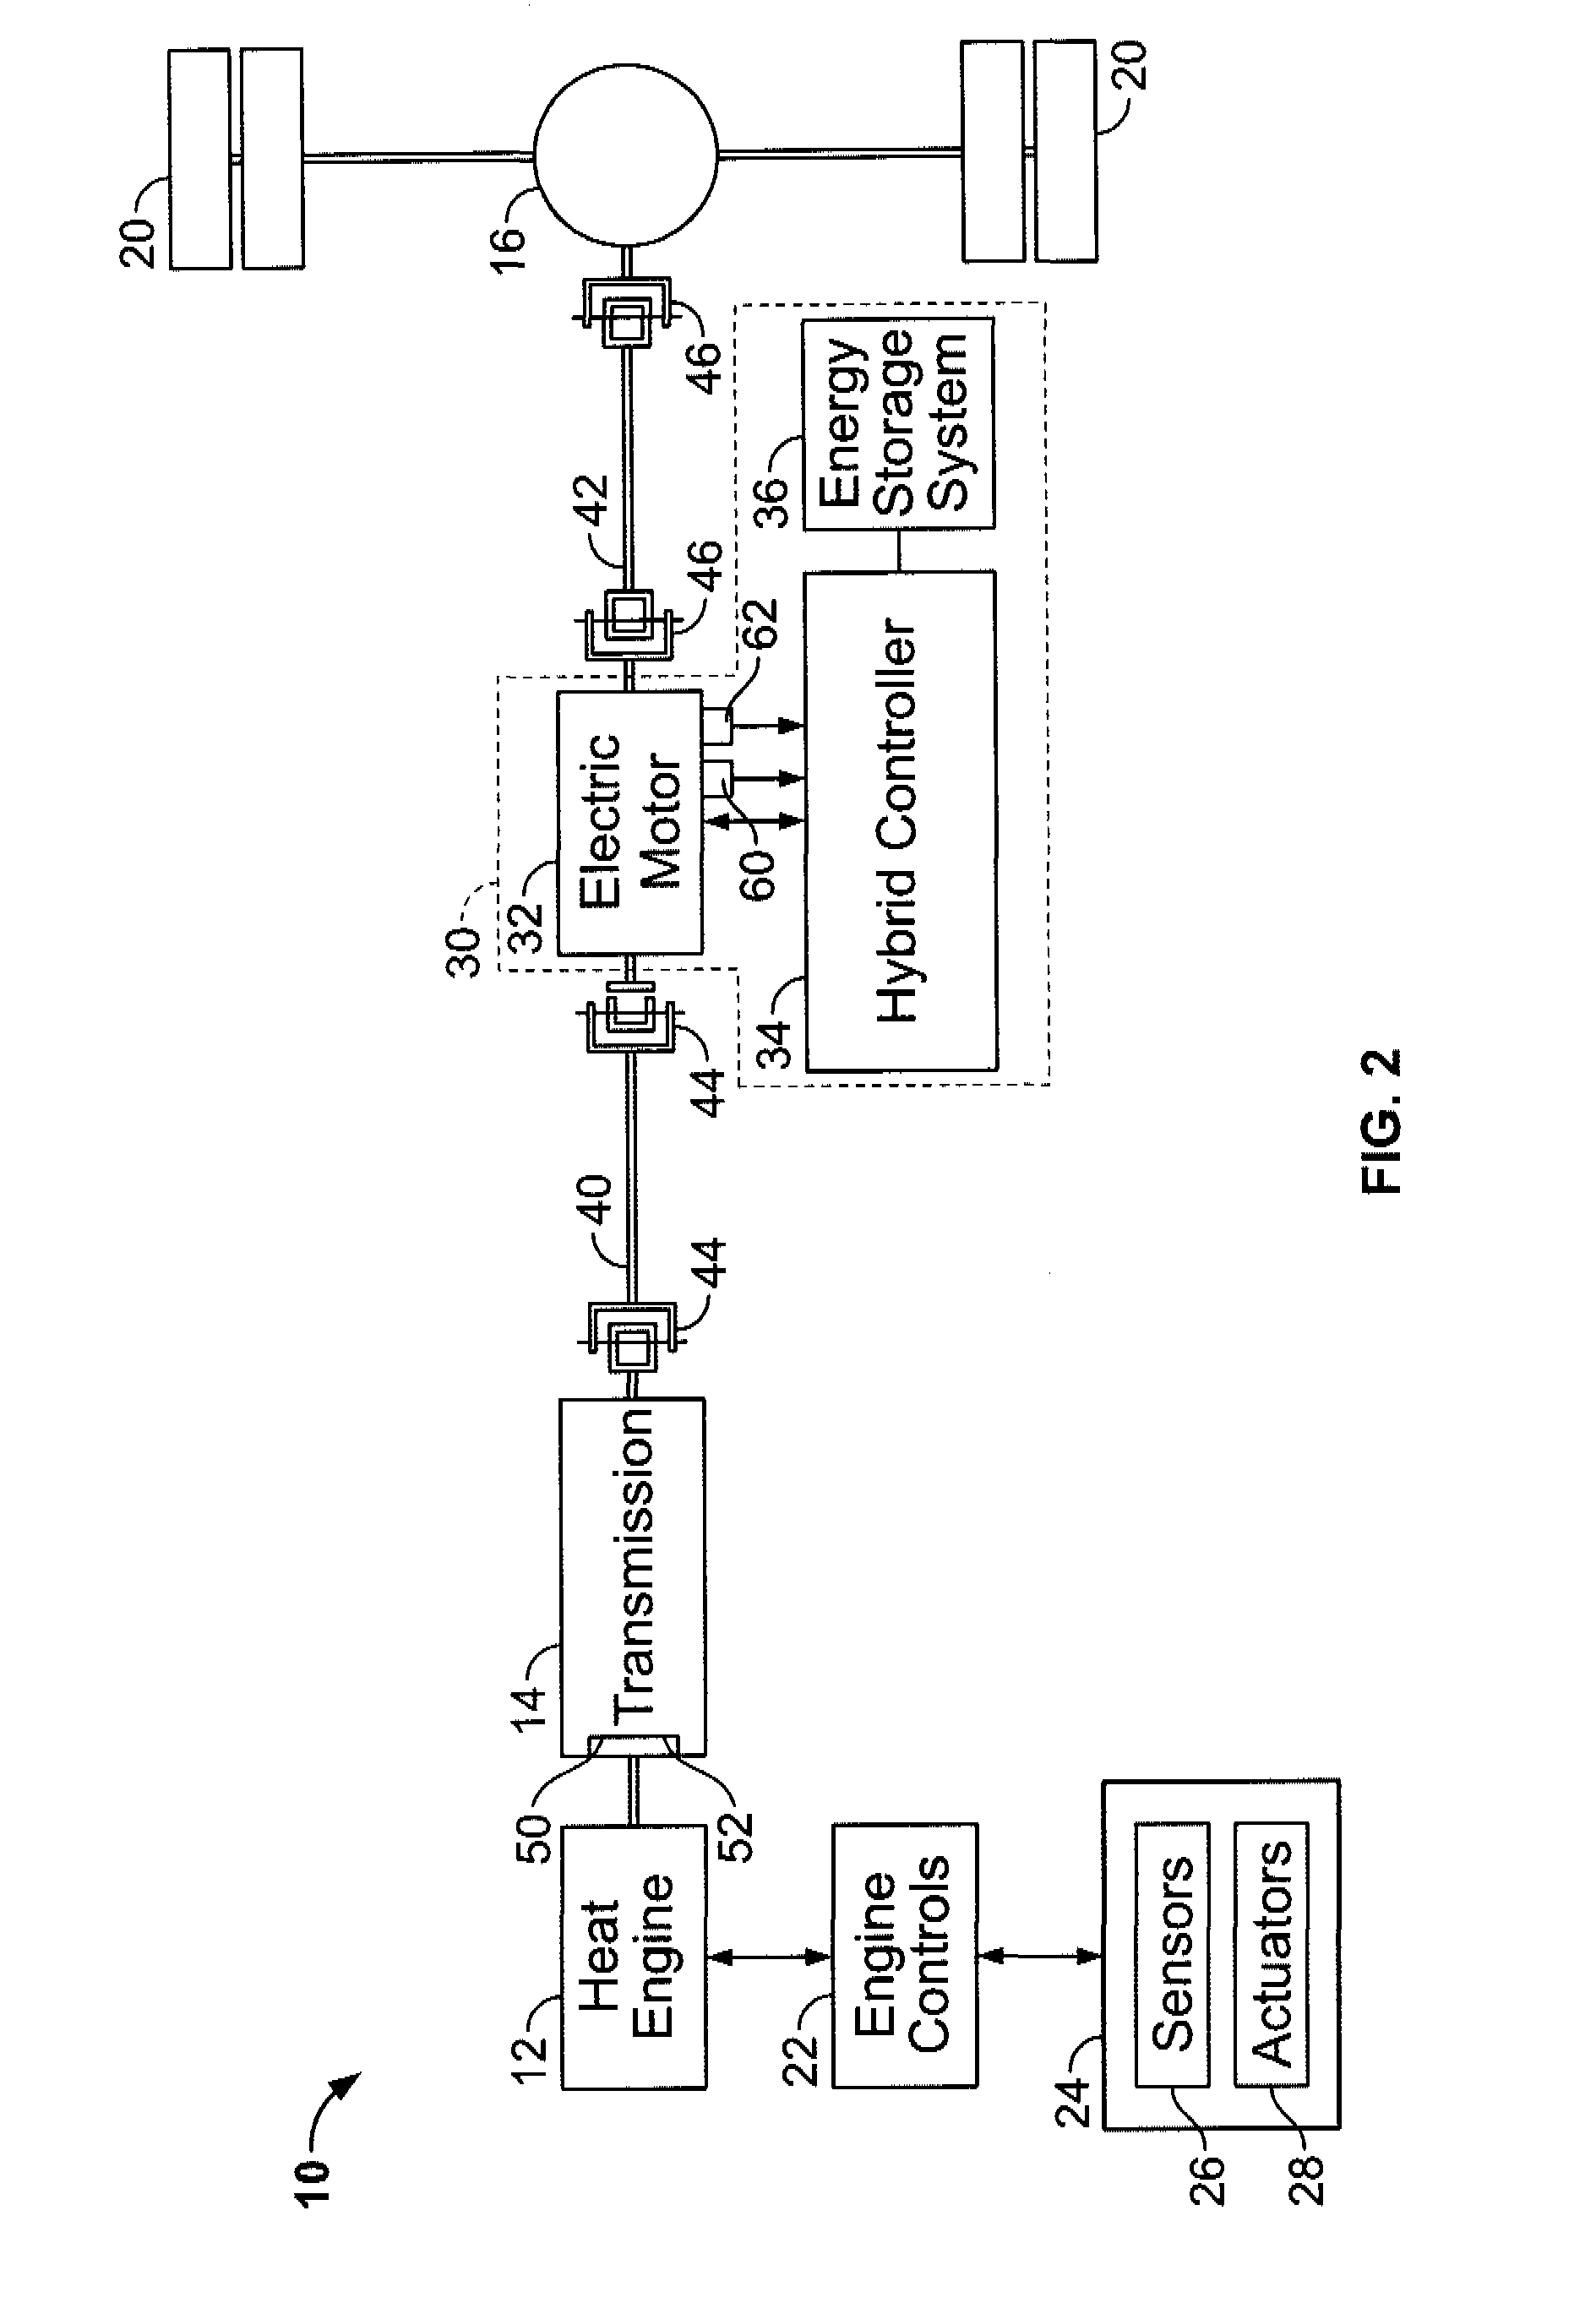 Hybrid drive system and method of installing same